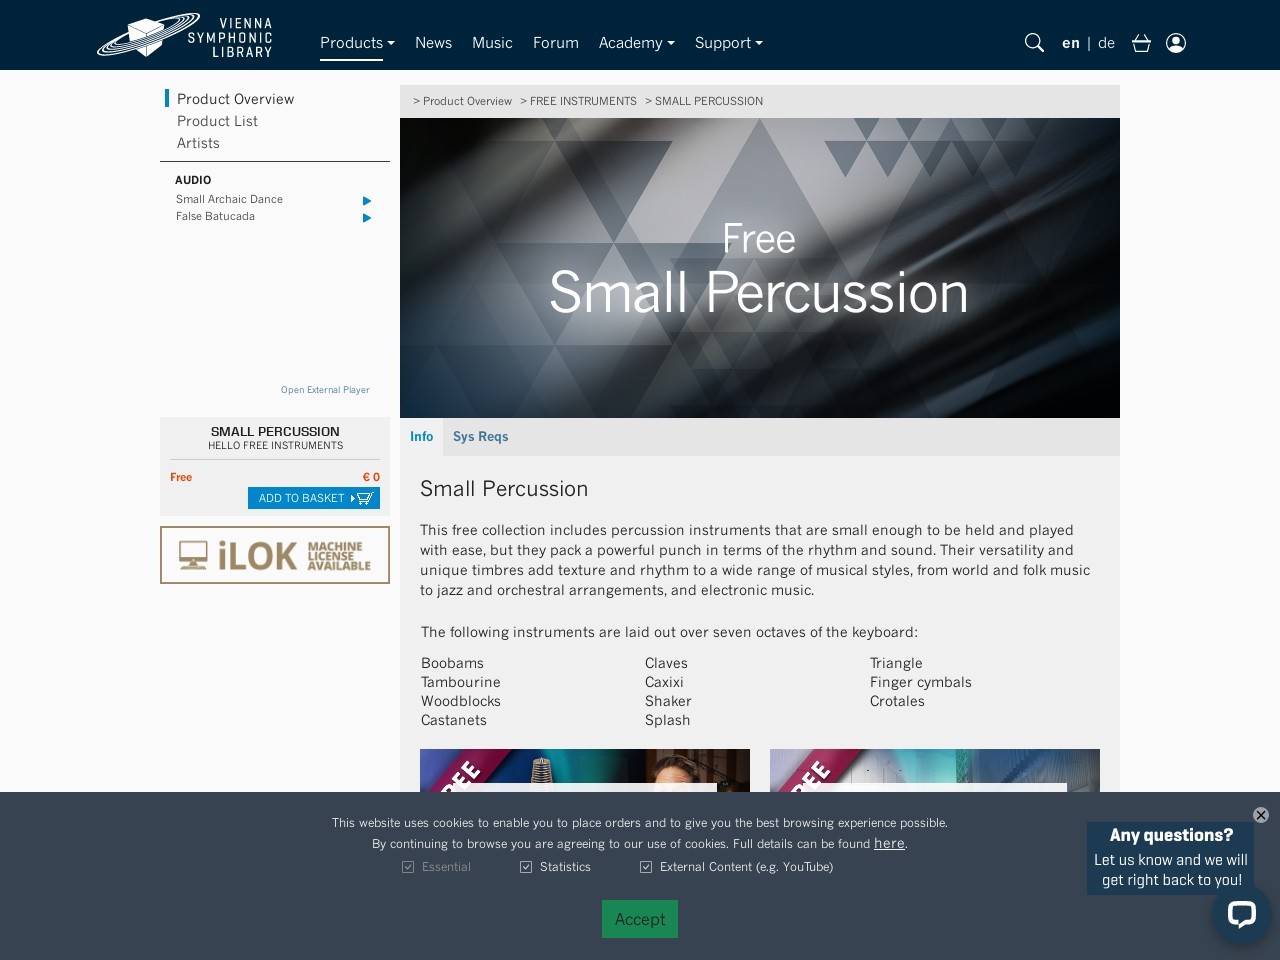 SMALL PERCUSSION - Vienna Symphonic Library